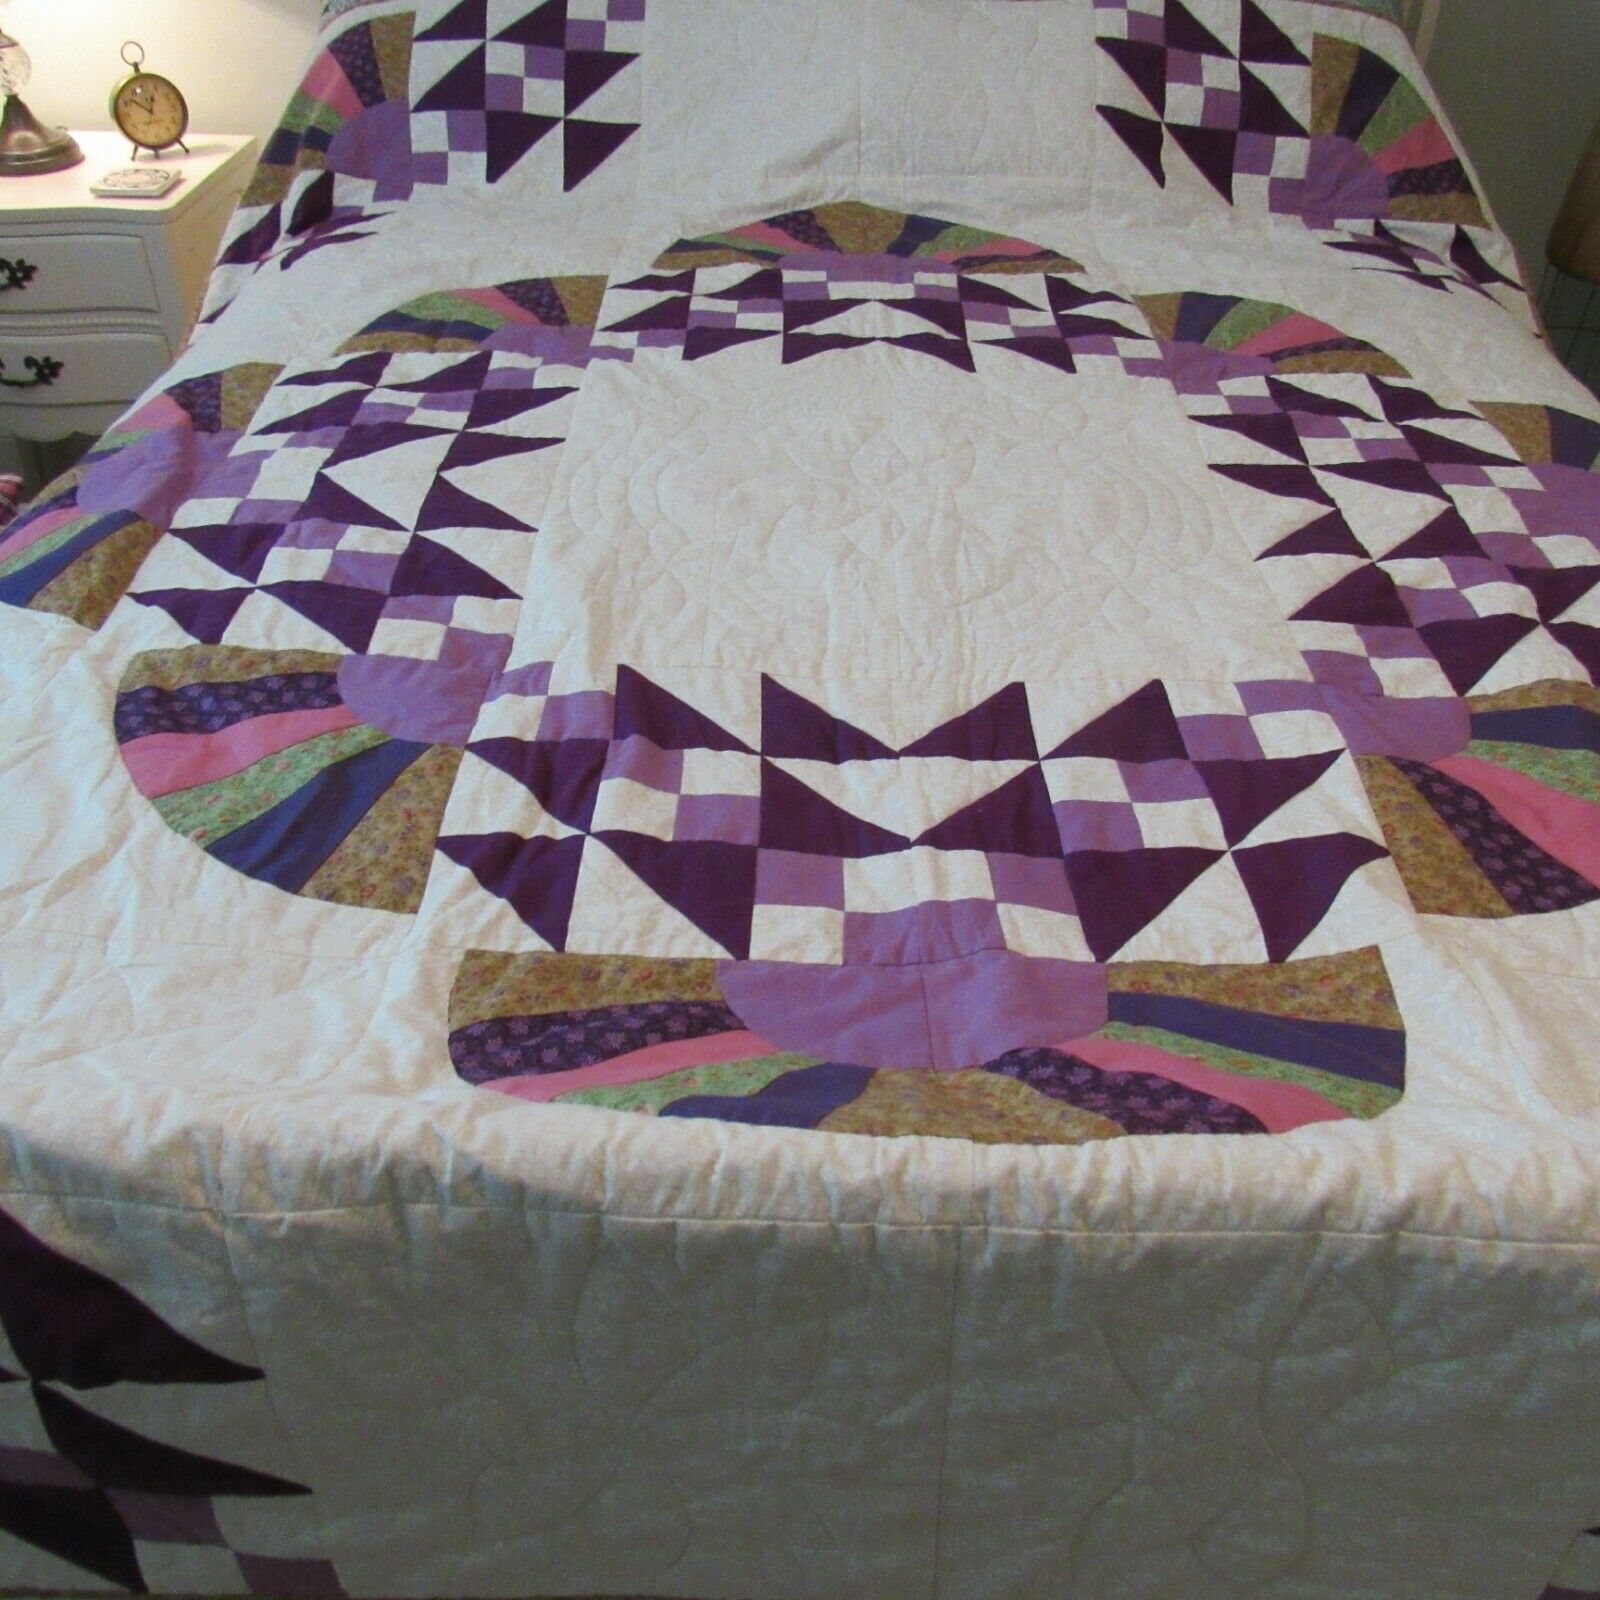 New Large Lap Size Handmade Friendship Garden Colorful Butterfly Quilt 56" X 68"